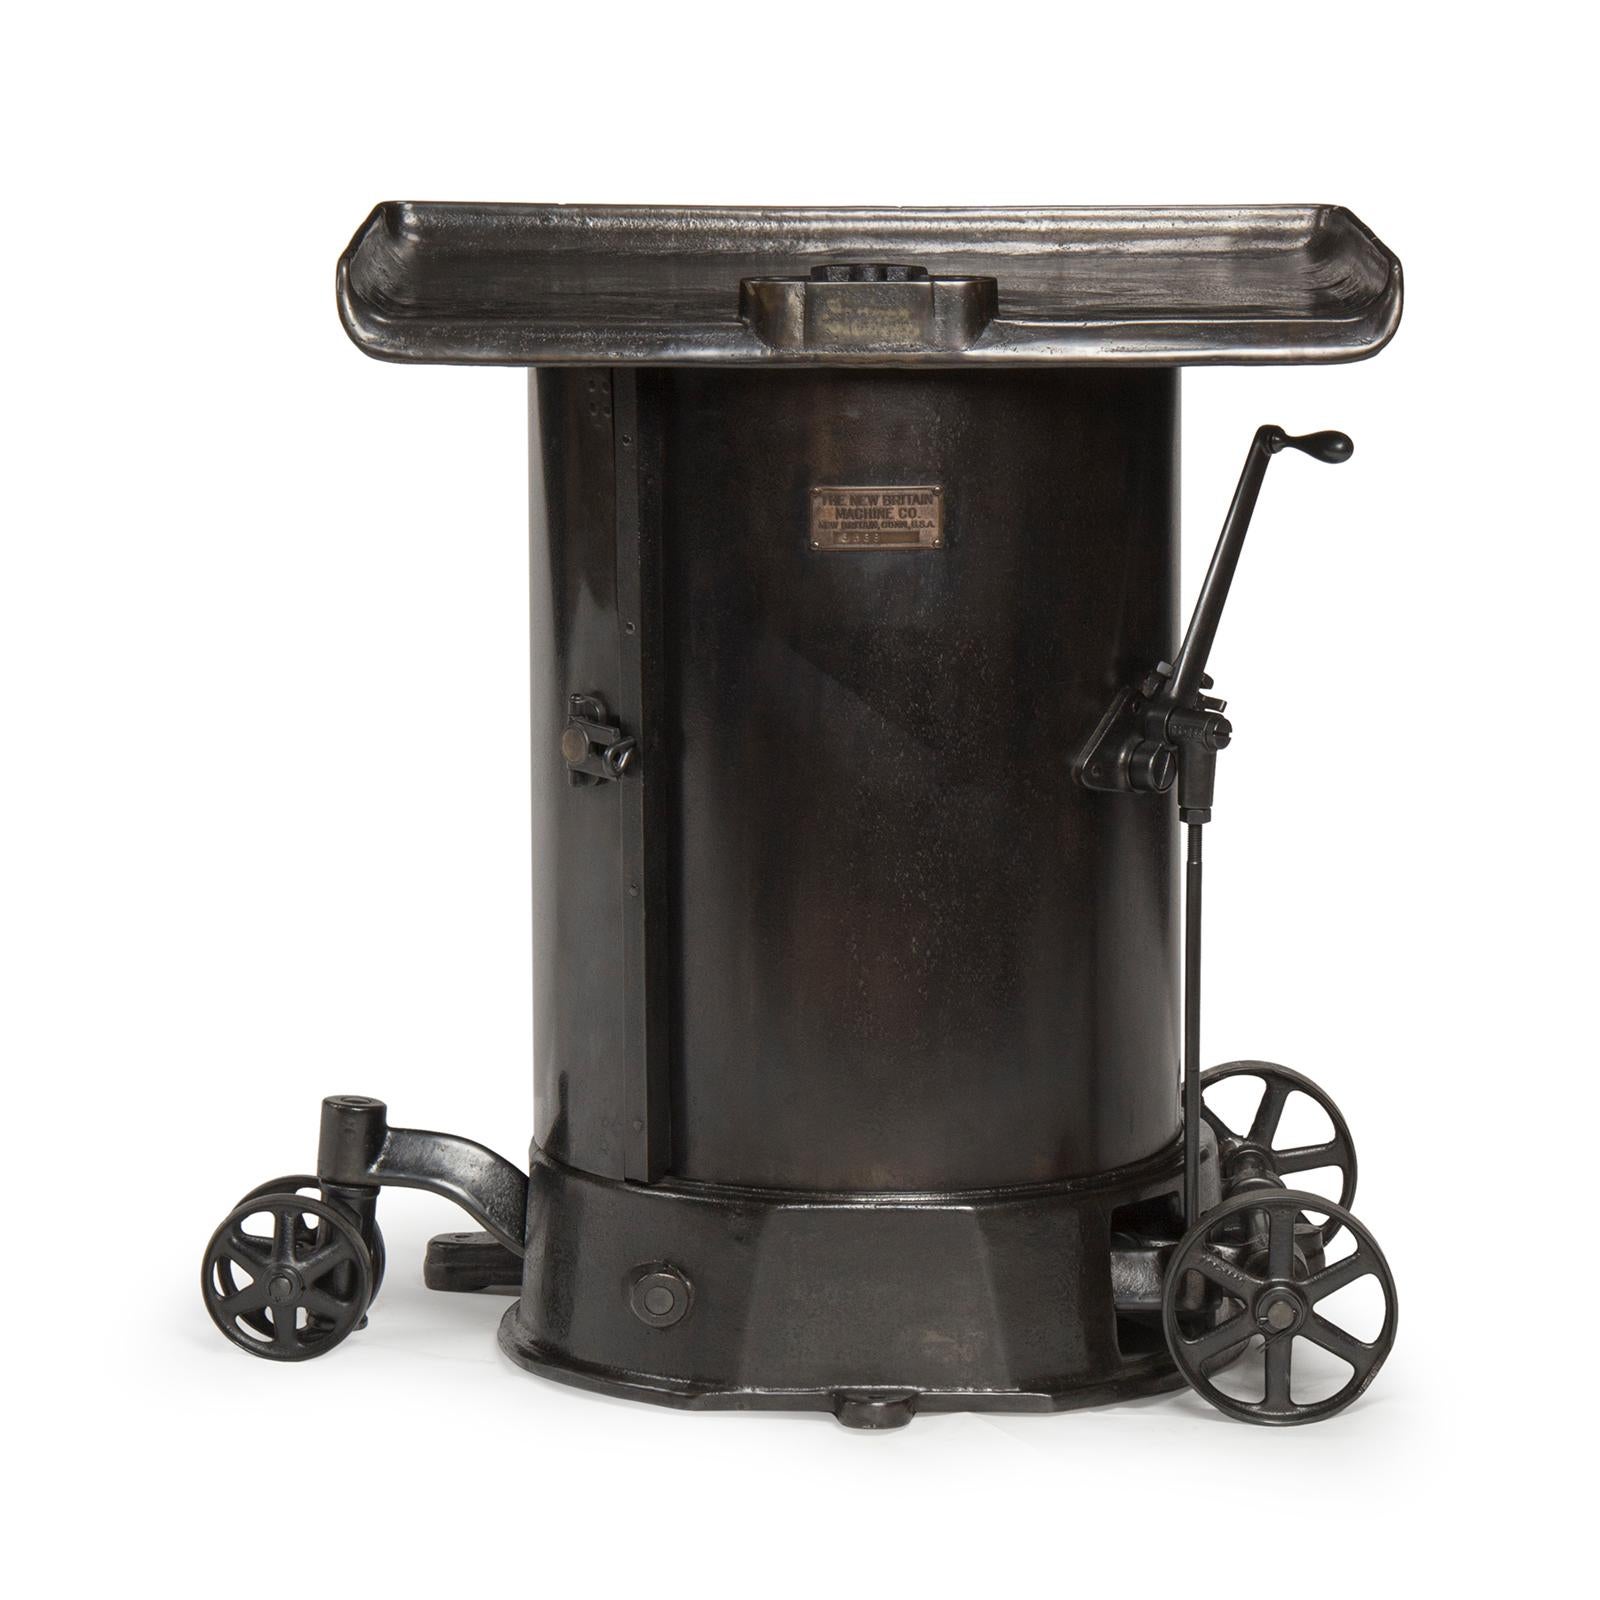 An Industrial vice stand or work table in patinated steel and cast iron with a drum shaped canister base on four (4) wheels.